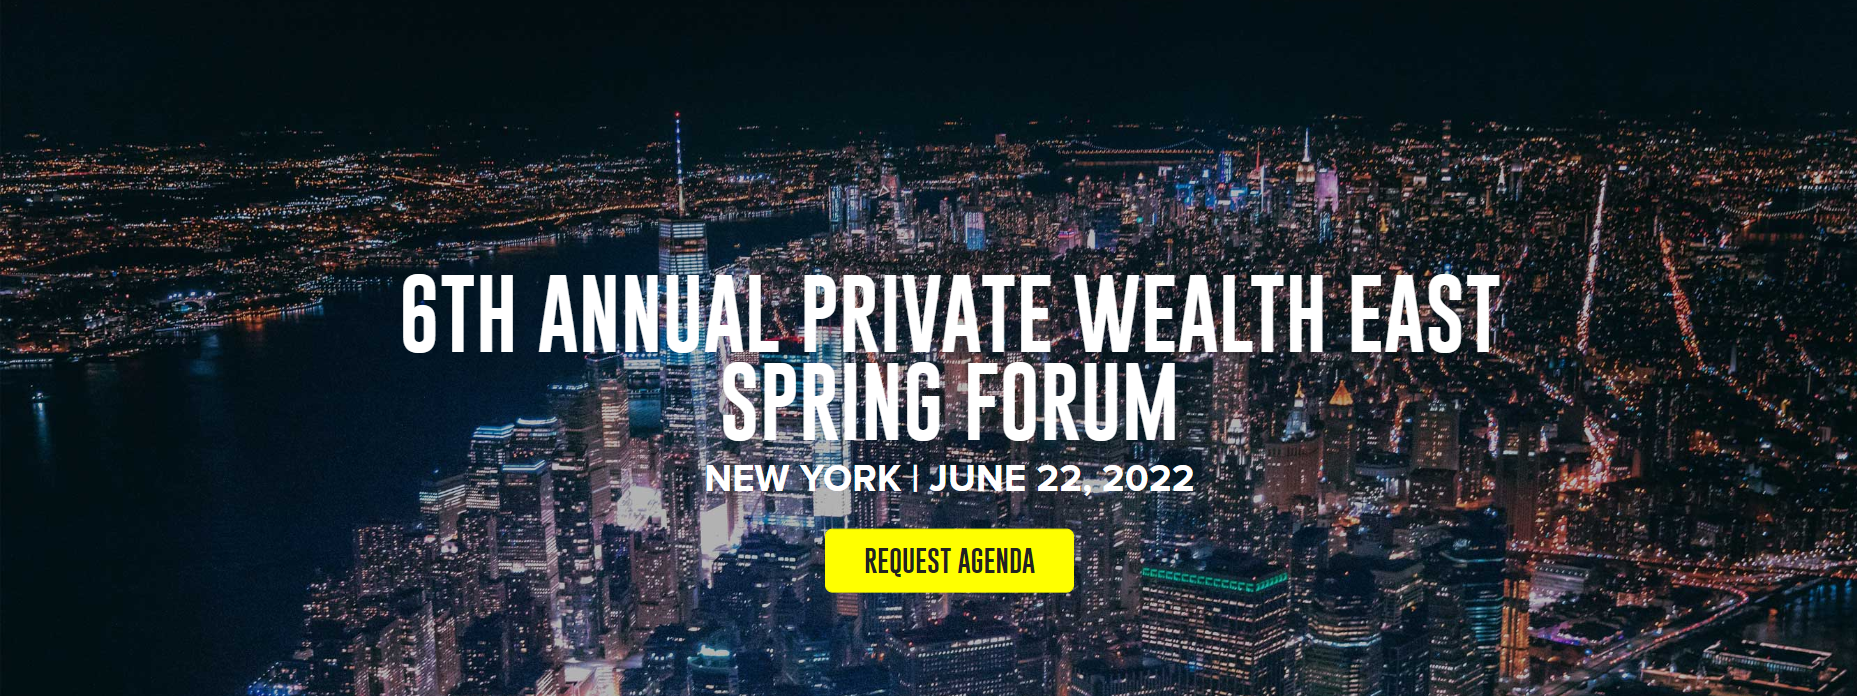 JOIN THE 6TH ANNUAL PRIVATE WEALTH EAST SPRING FORUM